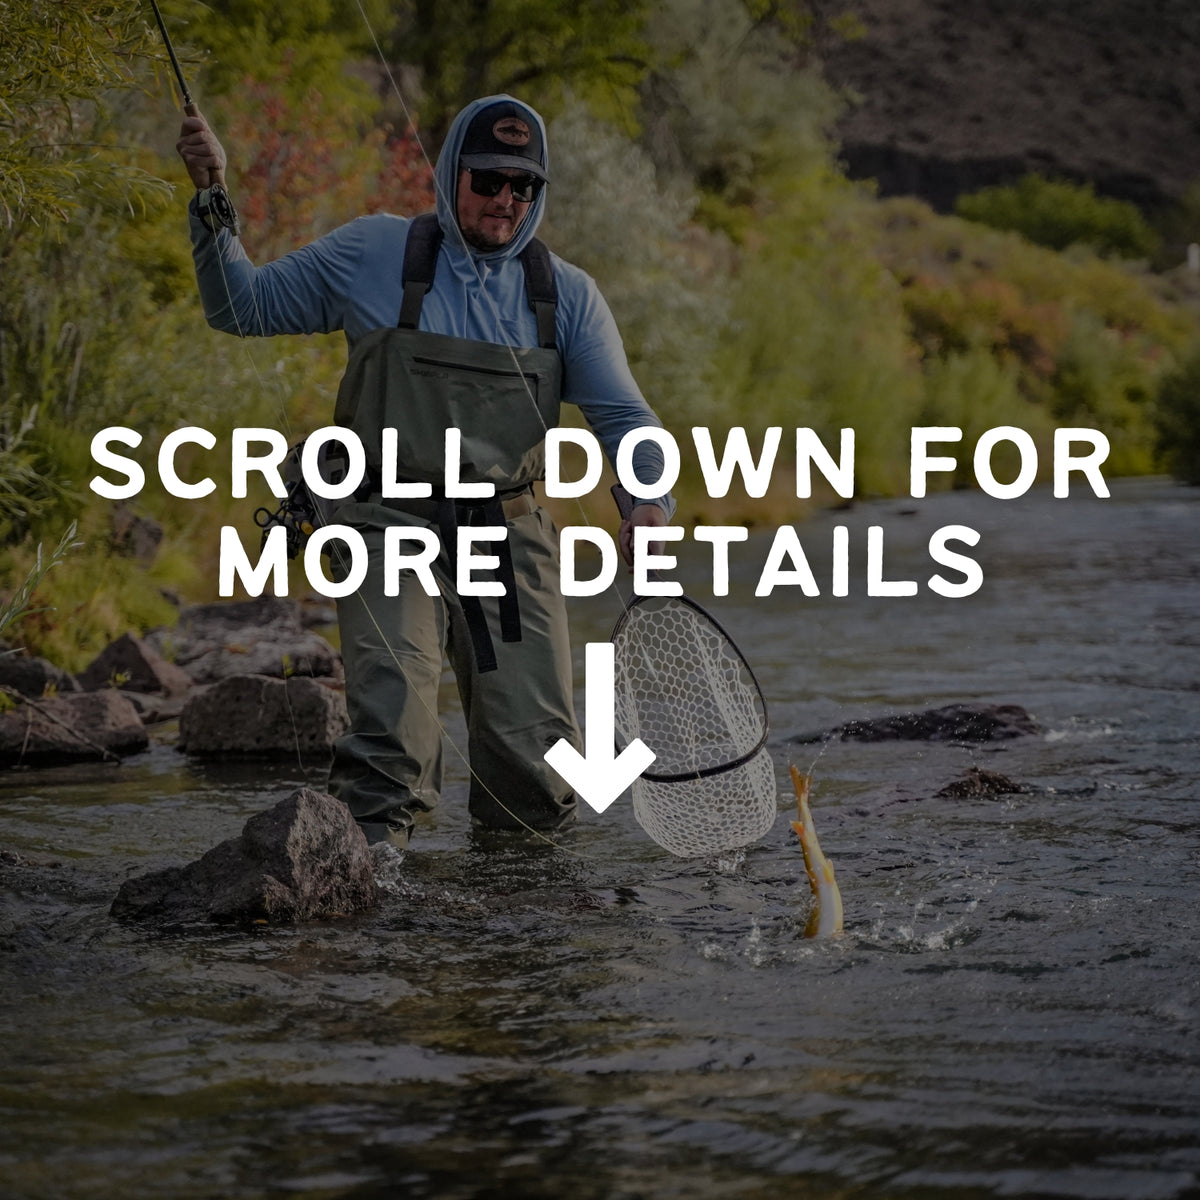 Untangled: Fly Fishing For Everyone